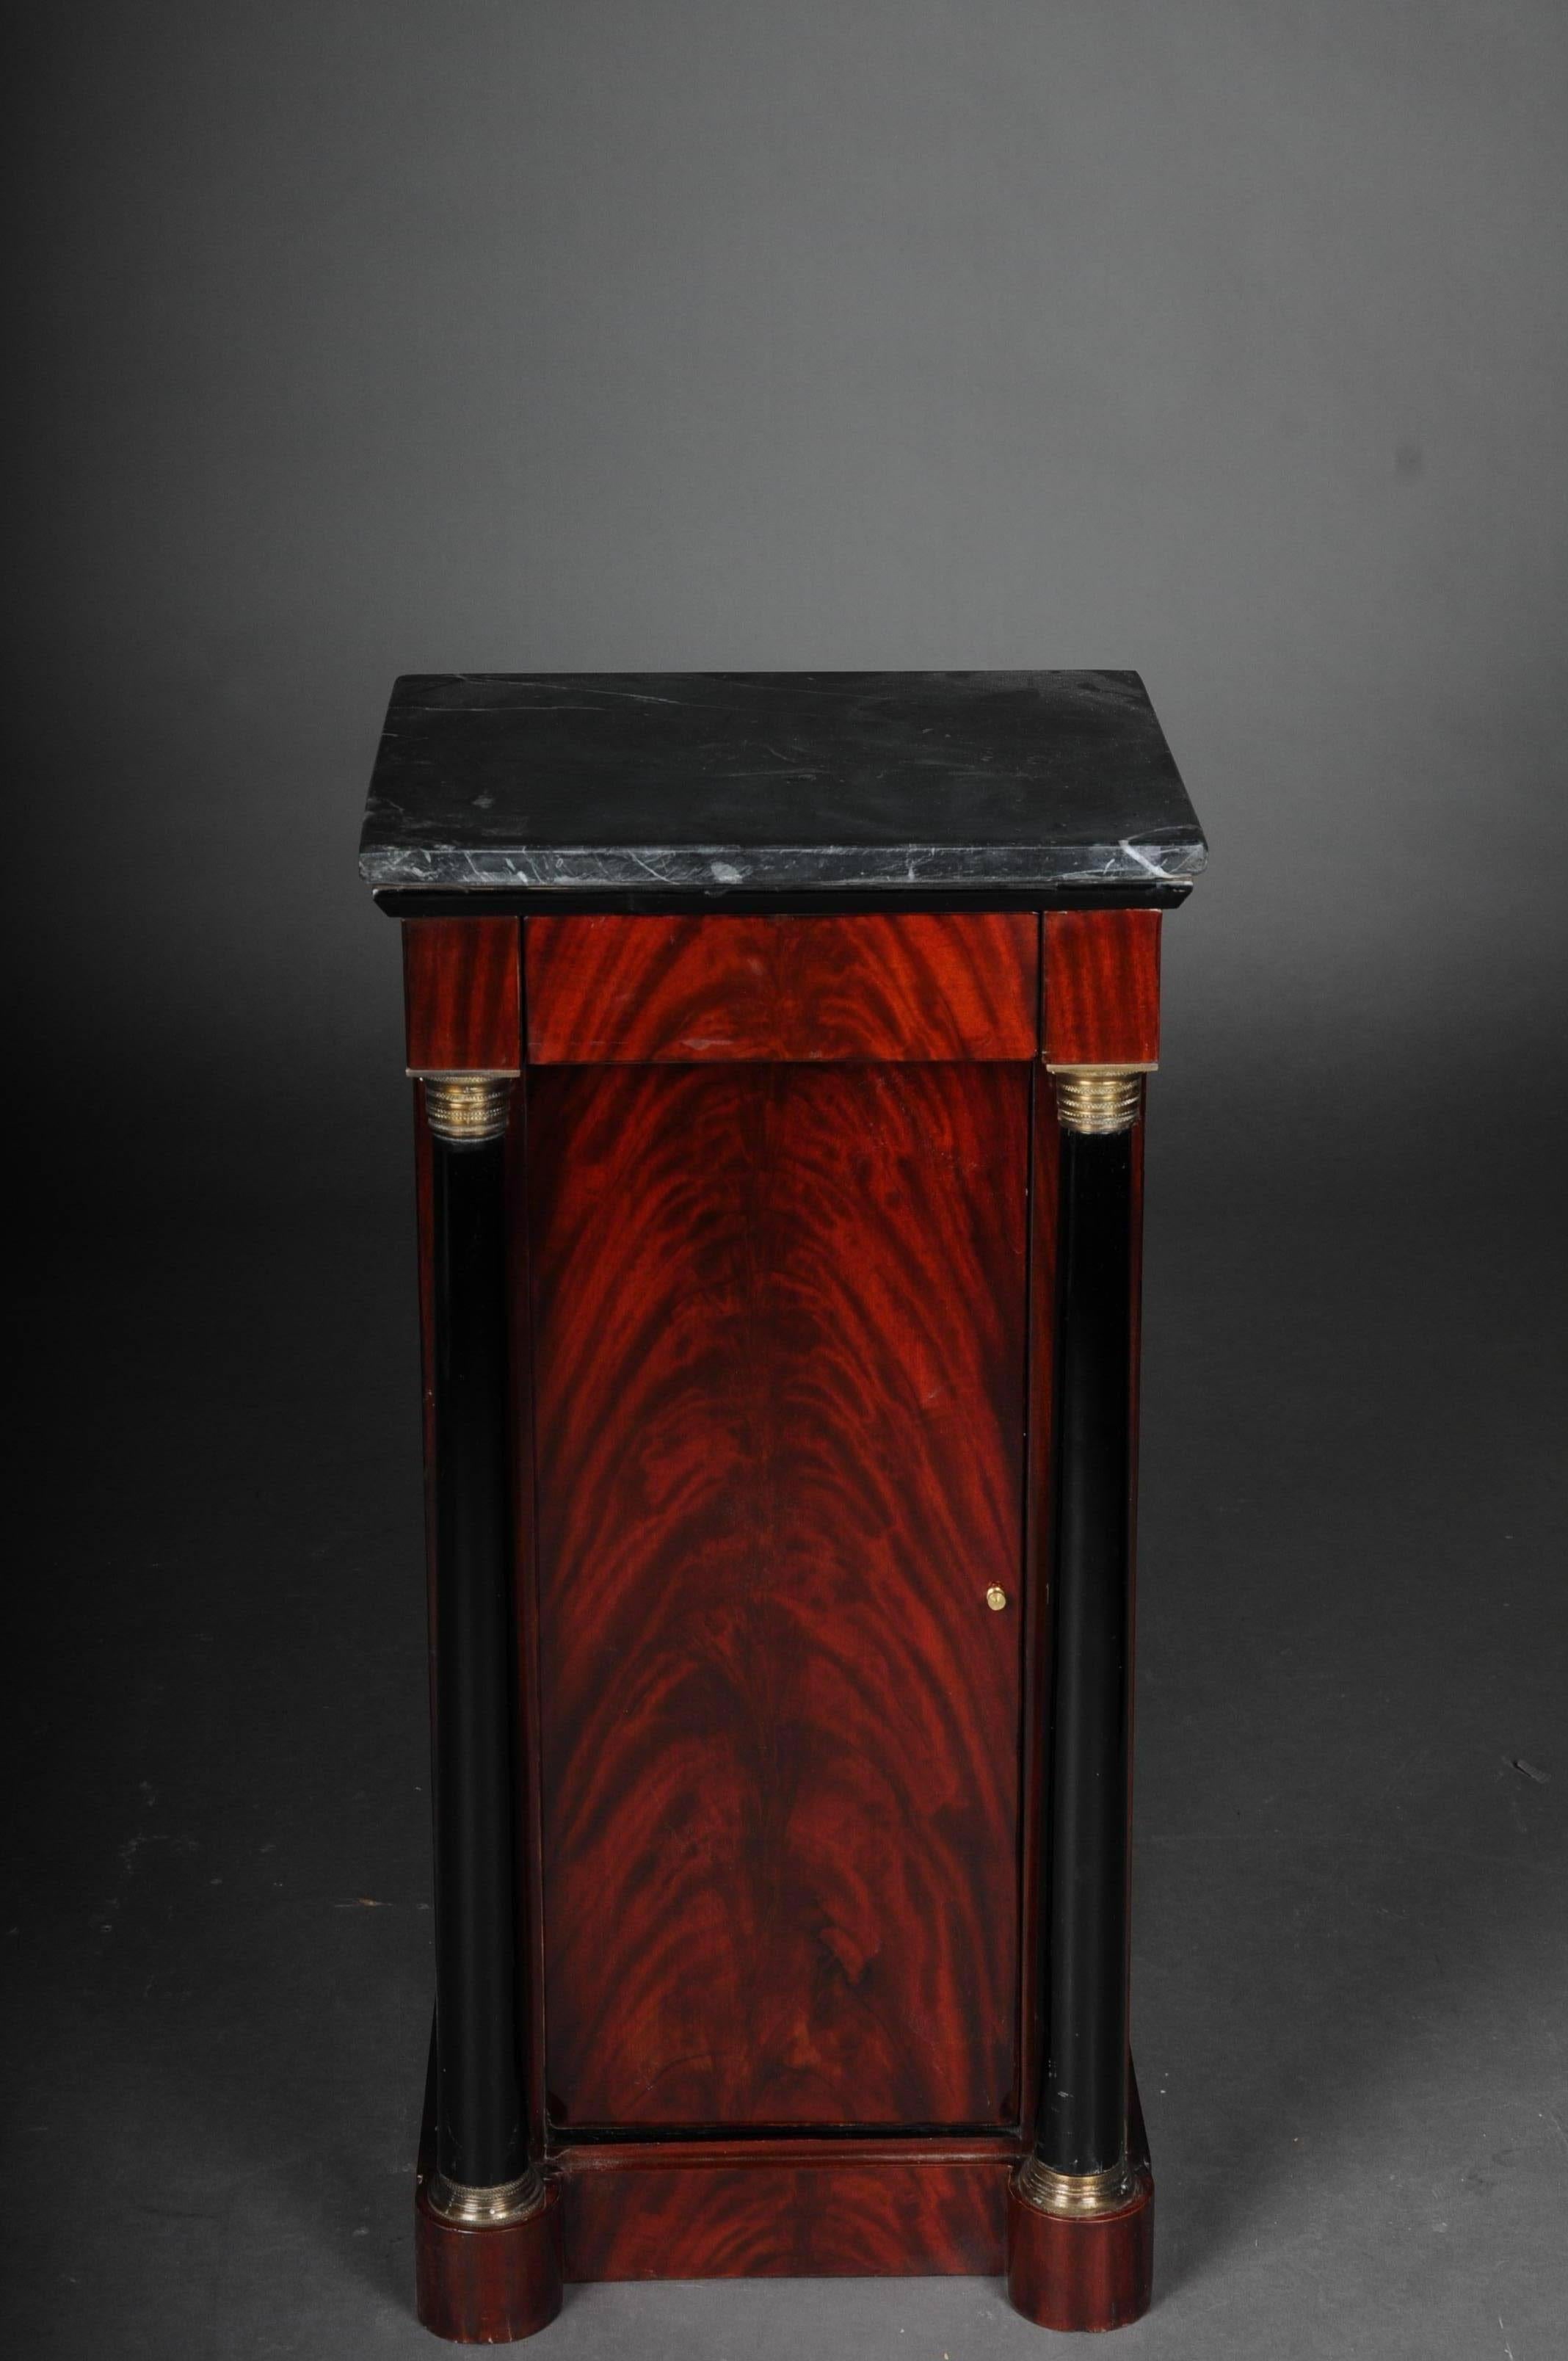 Classic bedside table, side table in Biedermeier, mahogany, left
Mahogany veneer on solid wood. High rectangular left-opening body on scalloped pedestal. Single-door in the front, flanked on the sides by full columns with brass bases and capitals,